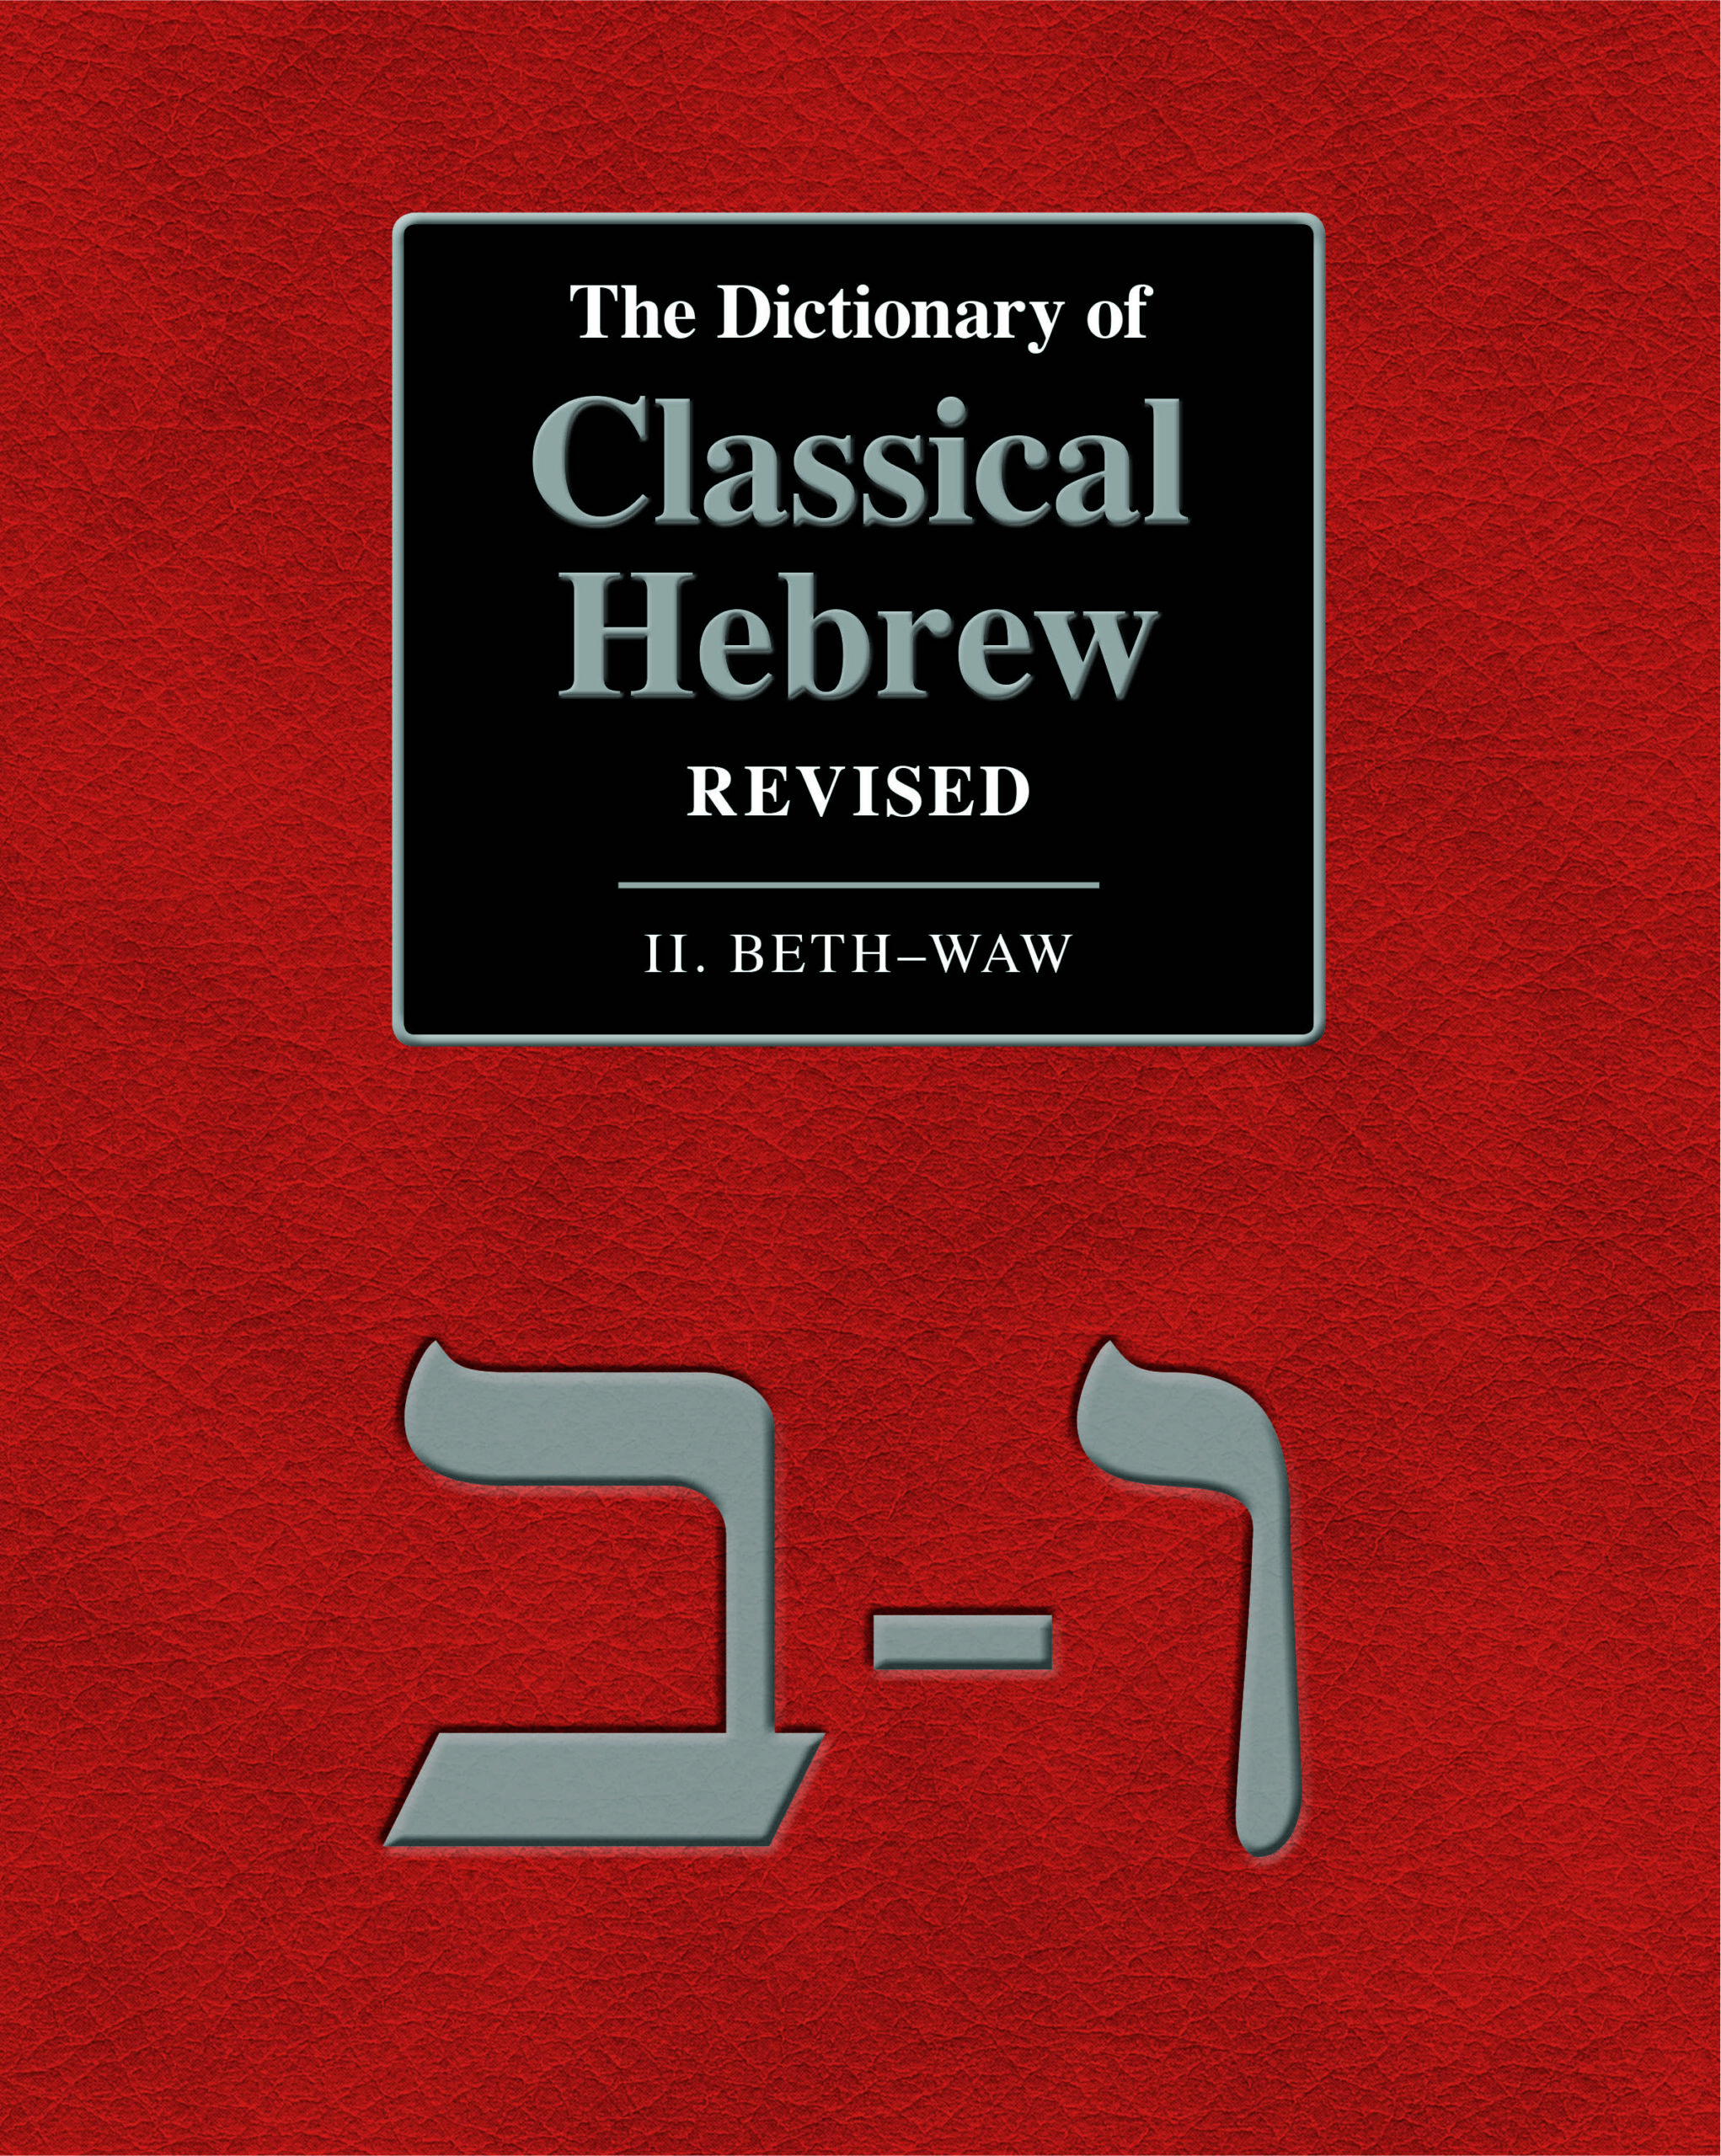 The Dictionary of Classical Hebrew, Revised